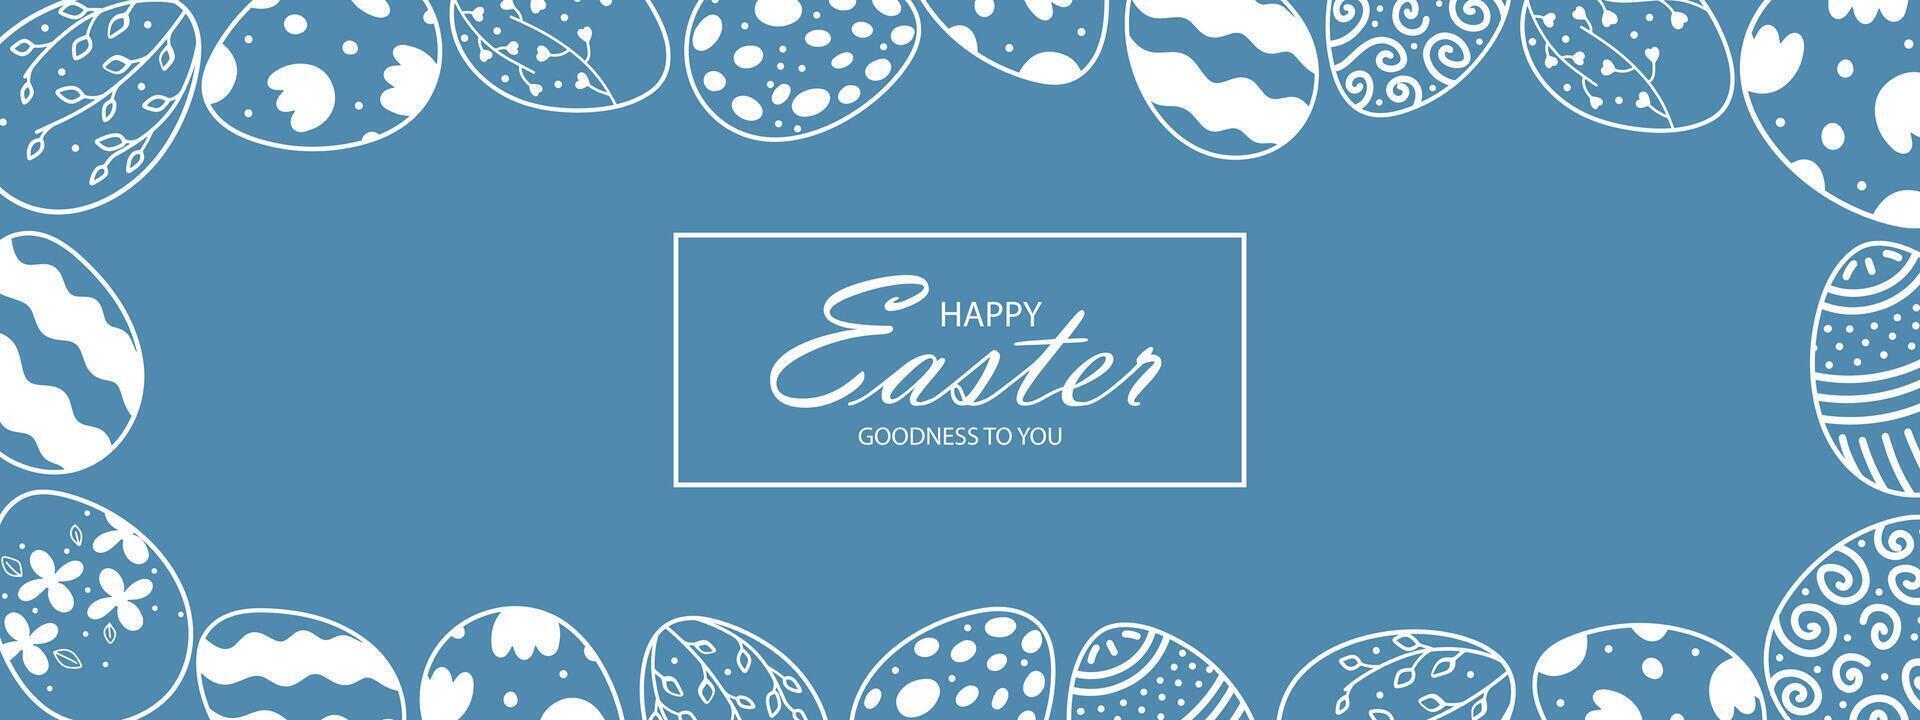 Easter web banner with vintage Easter eggs along the contour on blue background with place for text in the center. Frame with silhouettes of vintage Easter eggs. vector